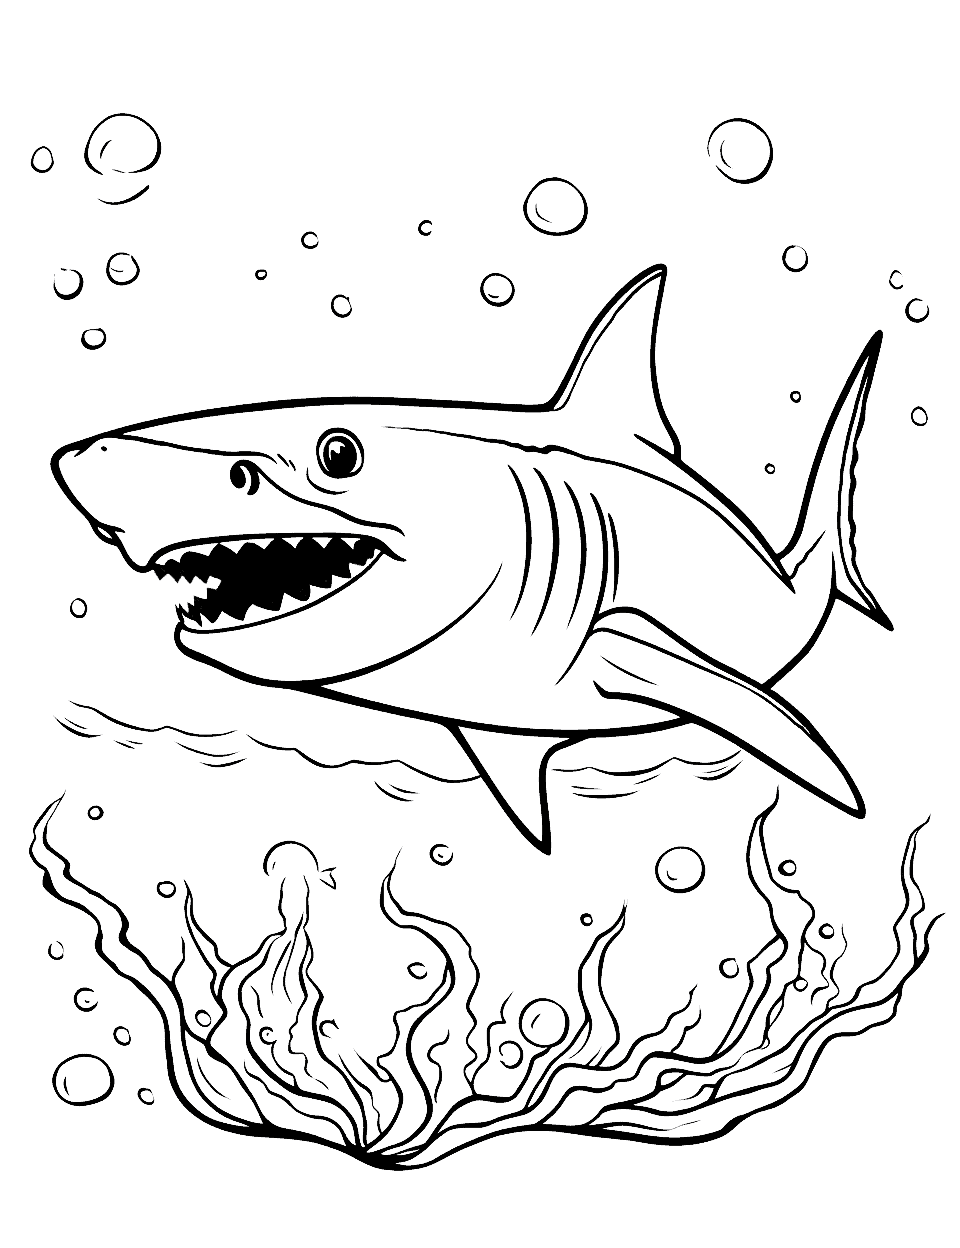 Black Tip Shark Swimming Coloring Page - An action scene of a black tip shark swimming.